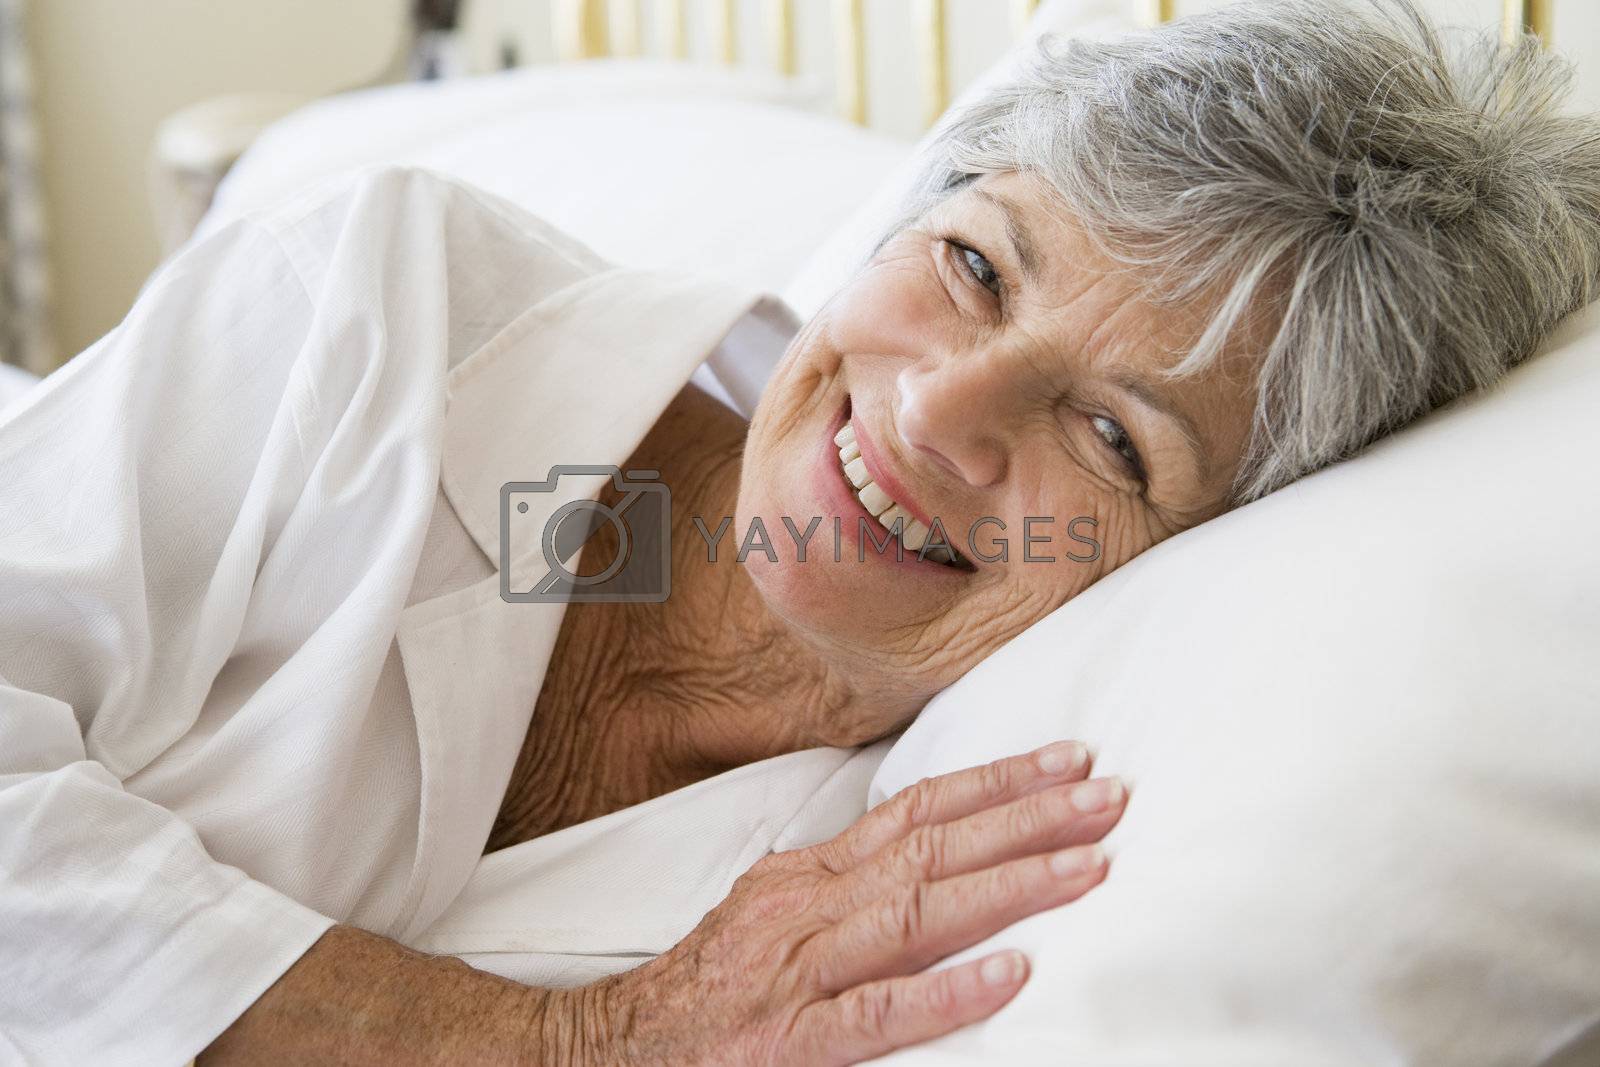 Royalty free image of Woman lying in bed smiling by MonkeyBusiness